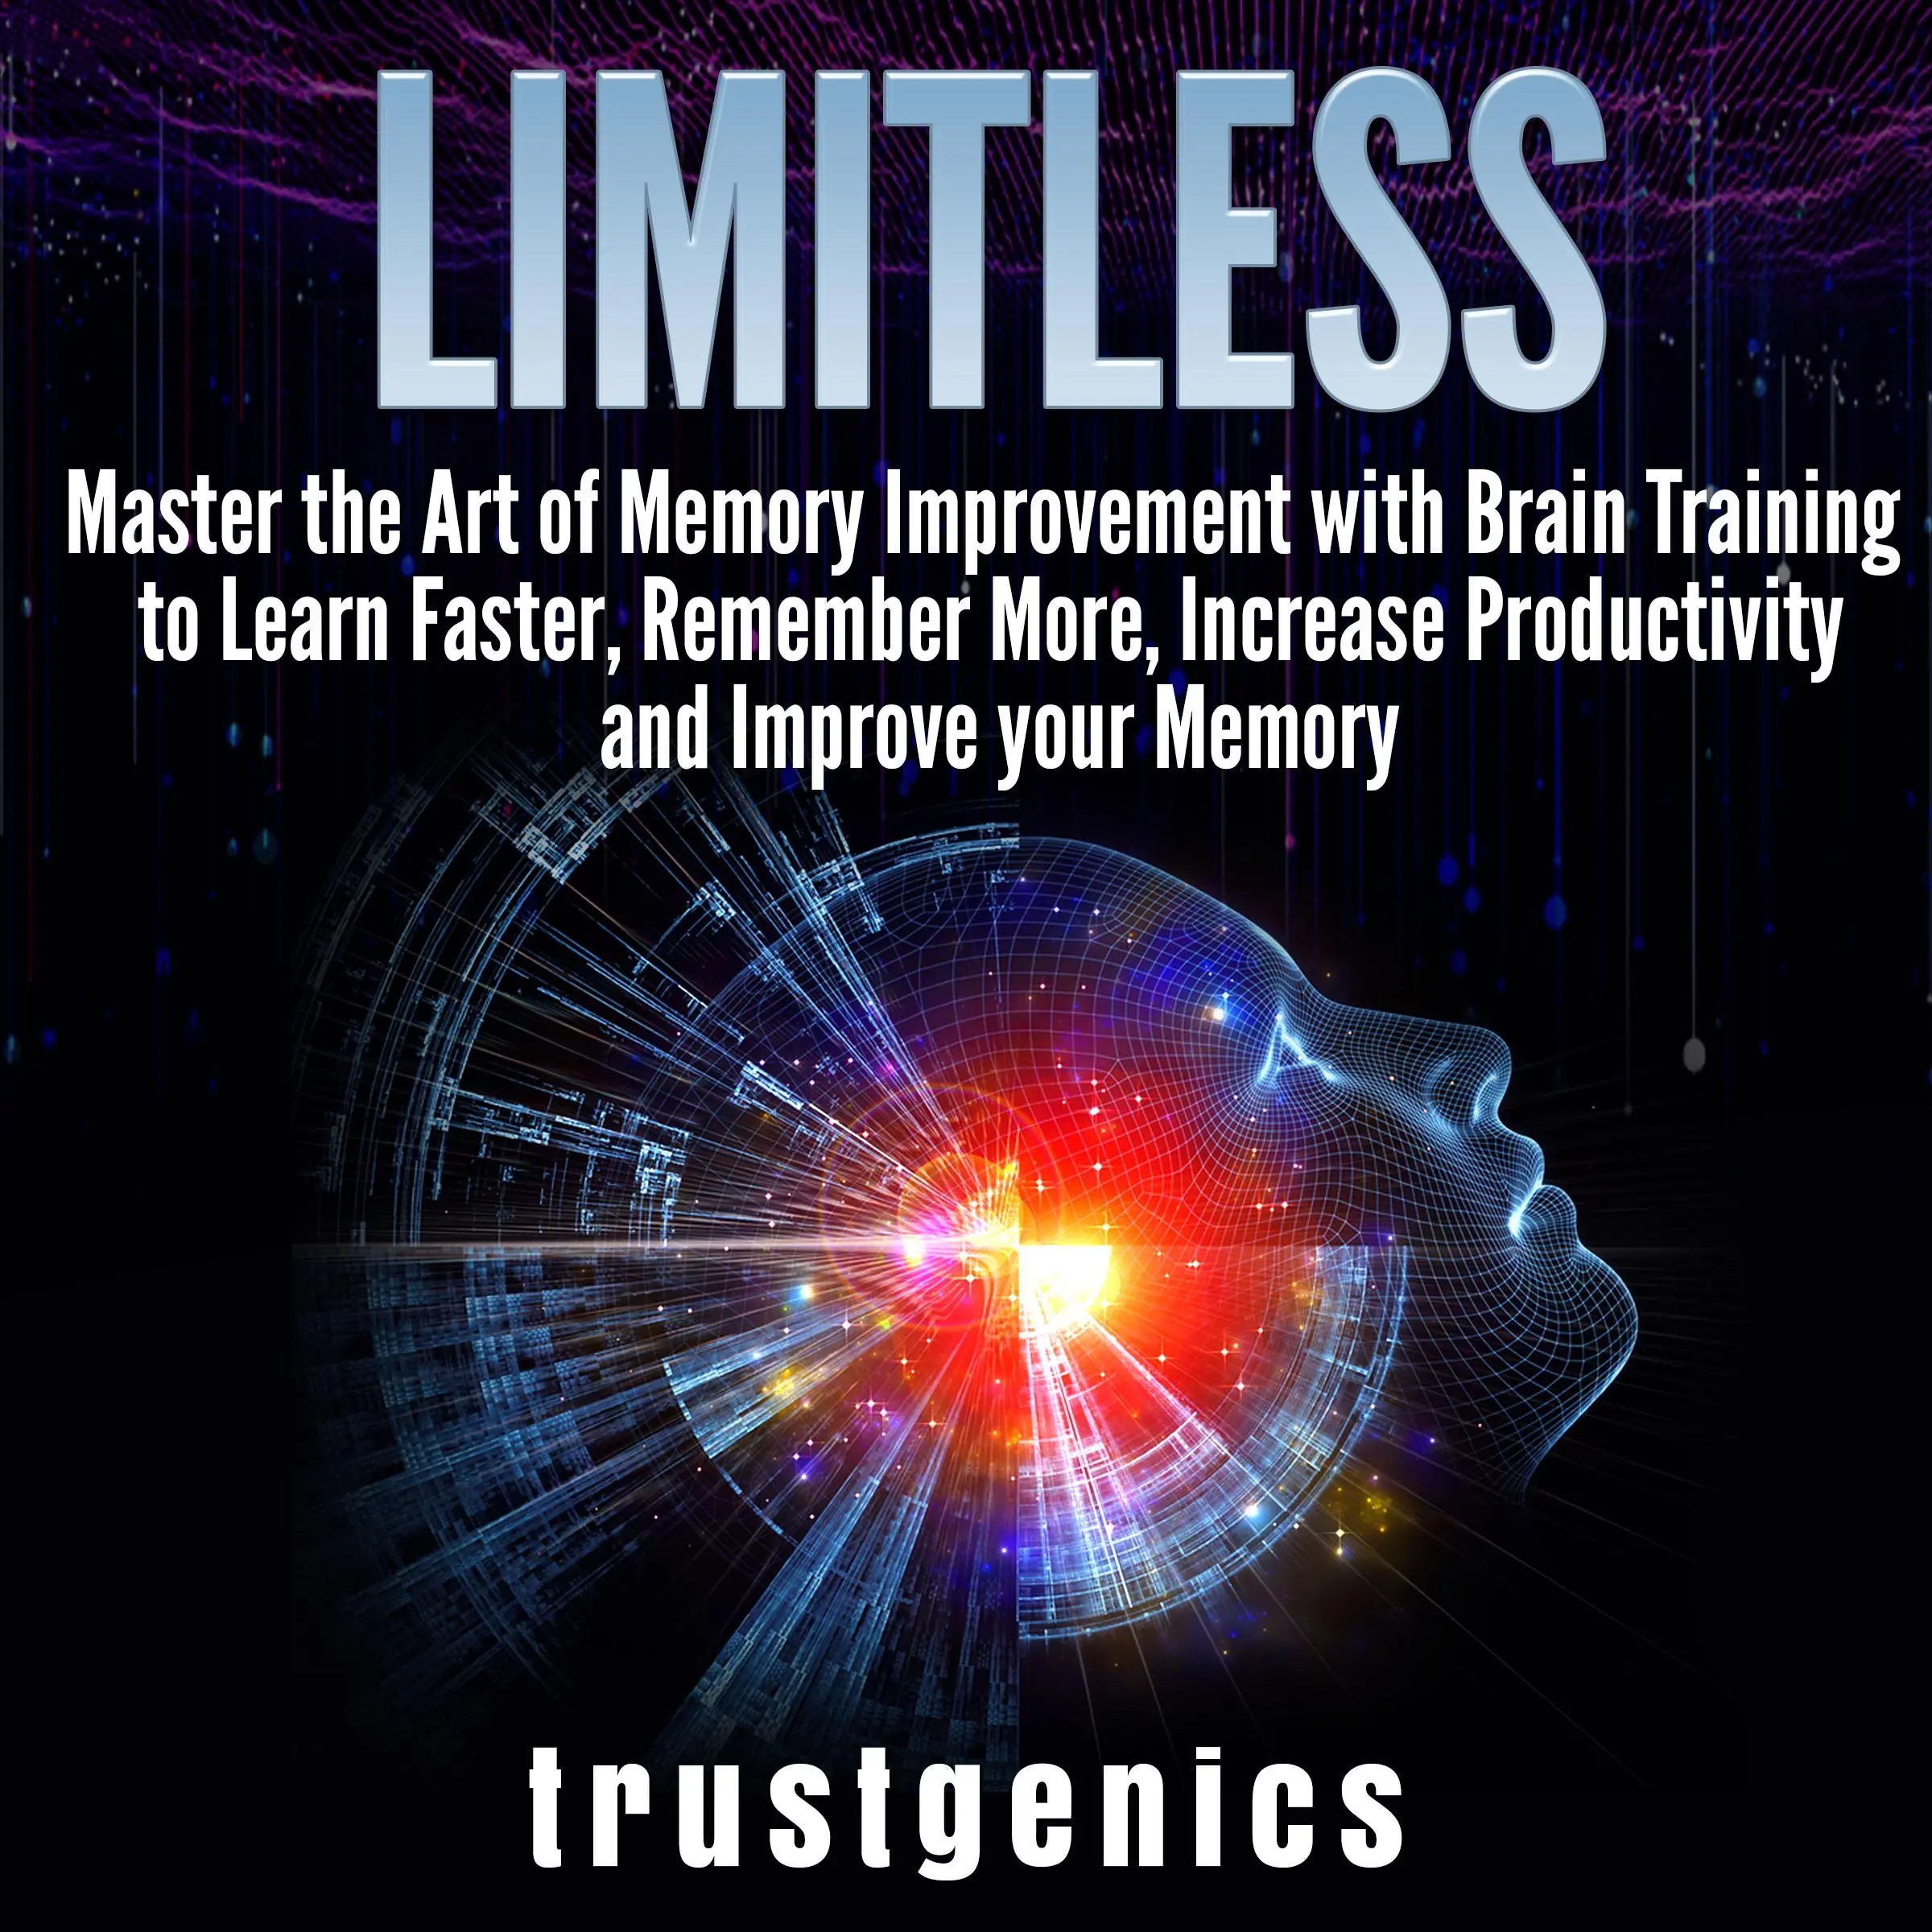 Limitless: Master the Art of Memory Improvement with Brain Training to Learn Faster, Remember More, Increase Productivity and Improve Memory by Trust Genics Audiobook